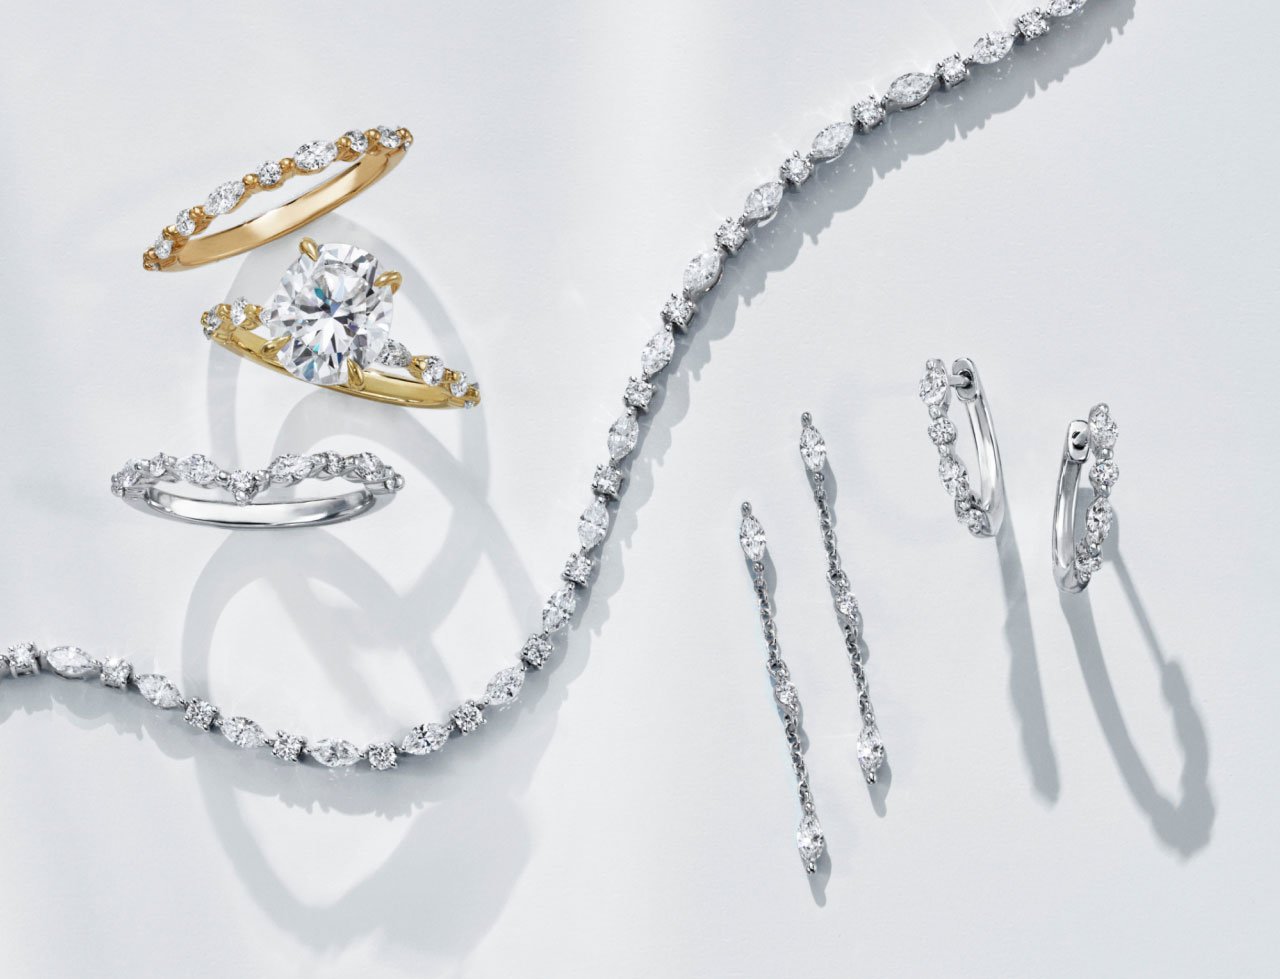 Diamond engagement ring, wedding rings, and assortment of fine jewelry from Brilliant Earth's Versailles collection.